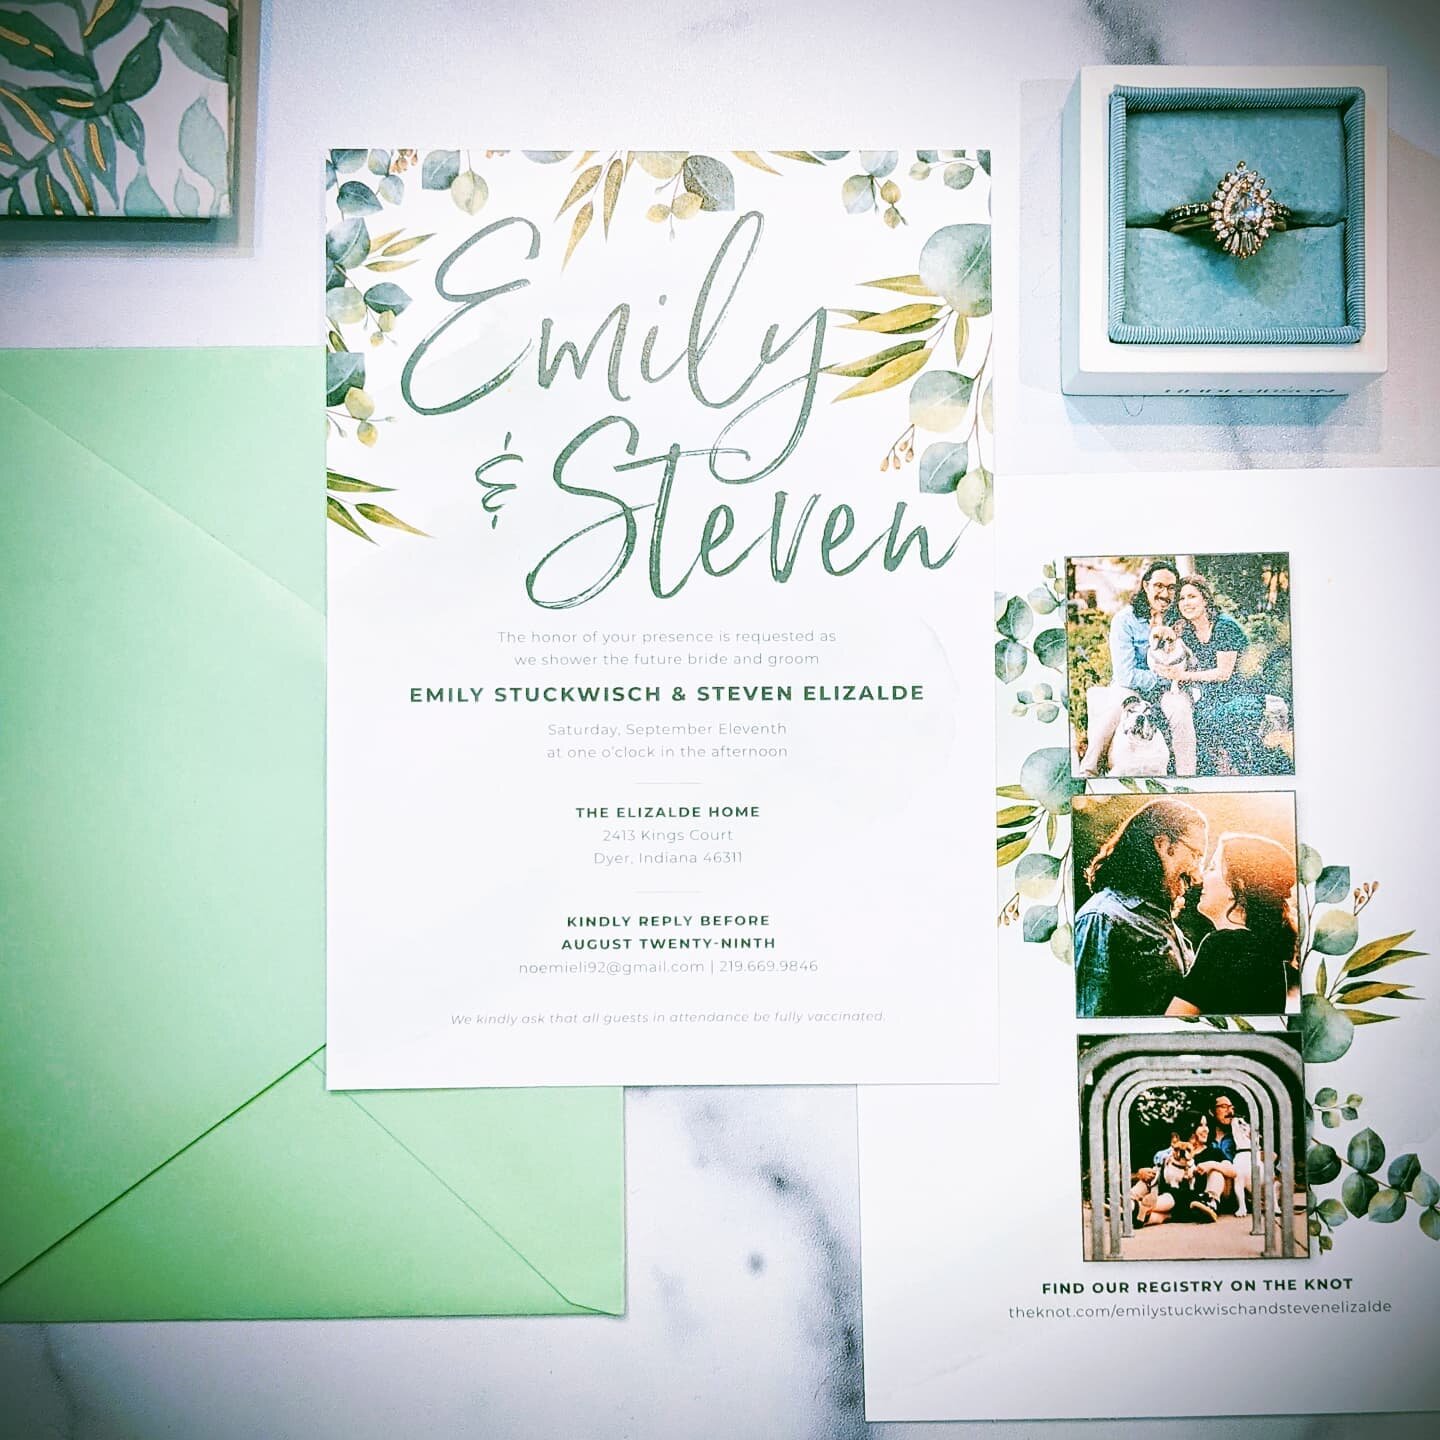 We love love. 💘 Bridal shower invites for our friends @oh_hi_mark_28 and @emilystuck ! We also found the perfect gift bag and envelopes from @papersource #bridalshower #bridalinspiration #invitations #invitesuite #customdesign #wedding